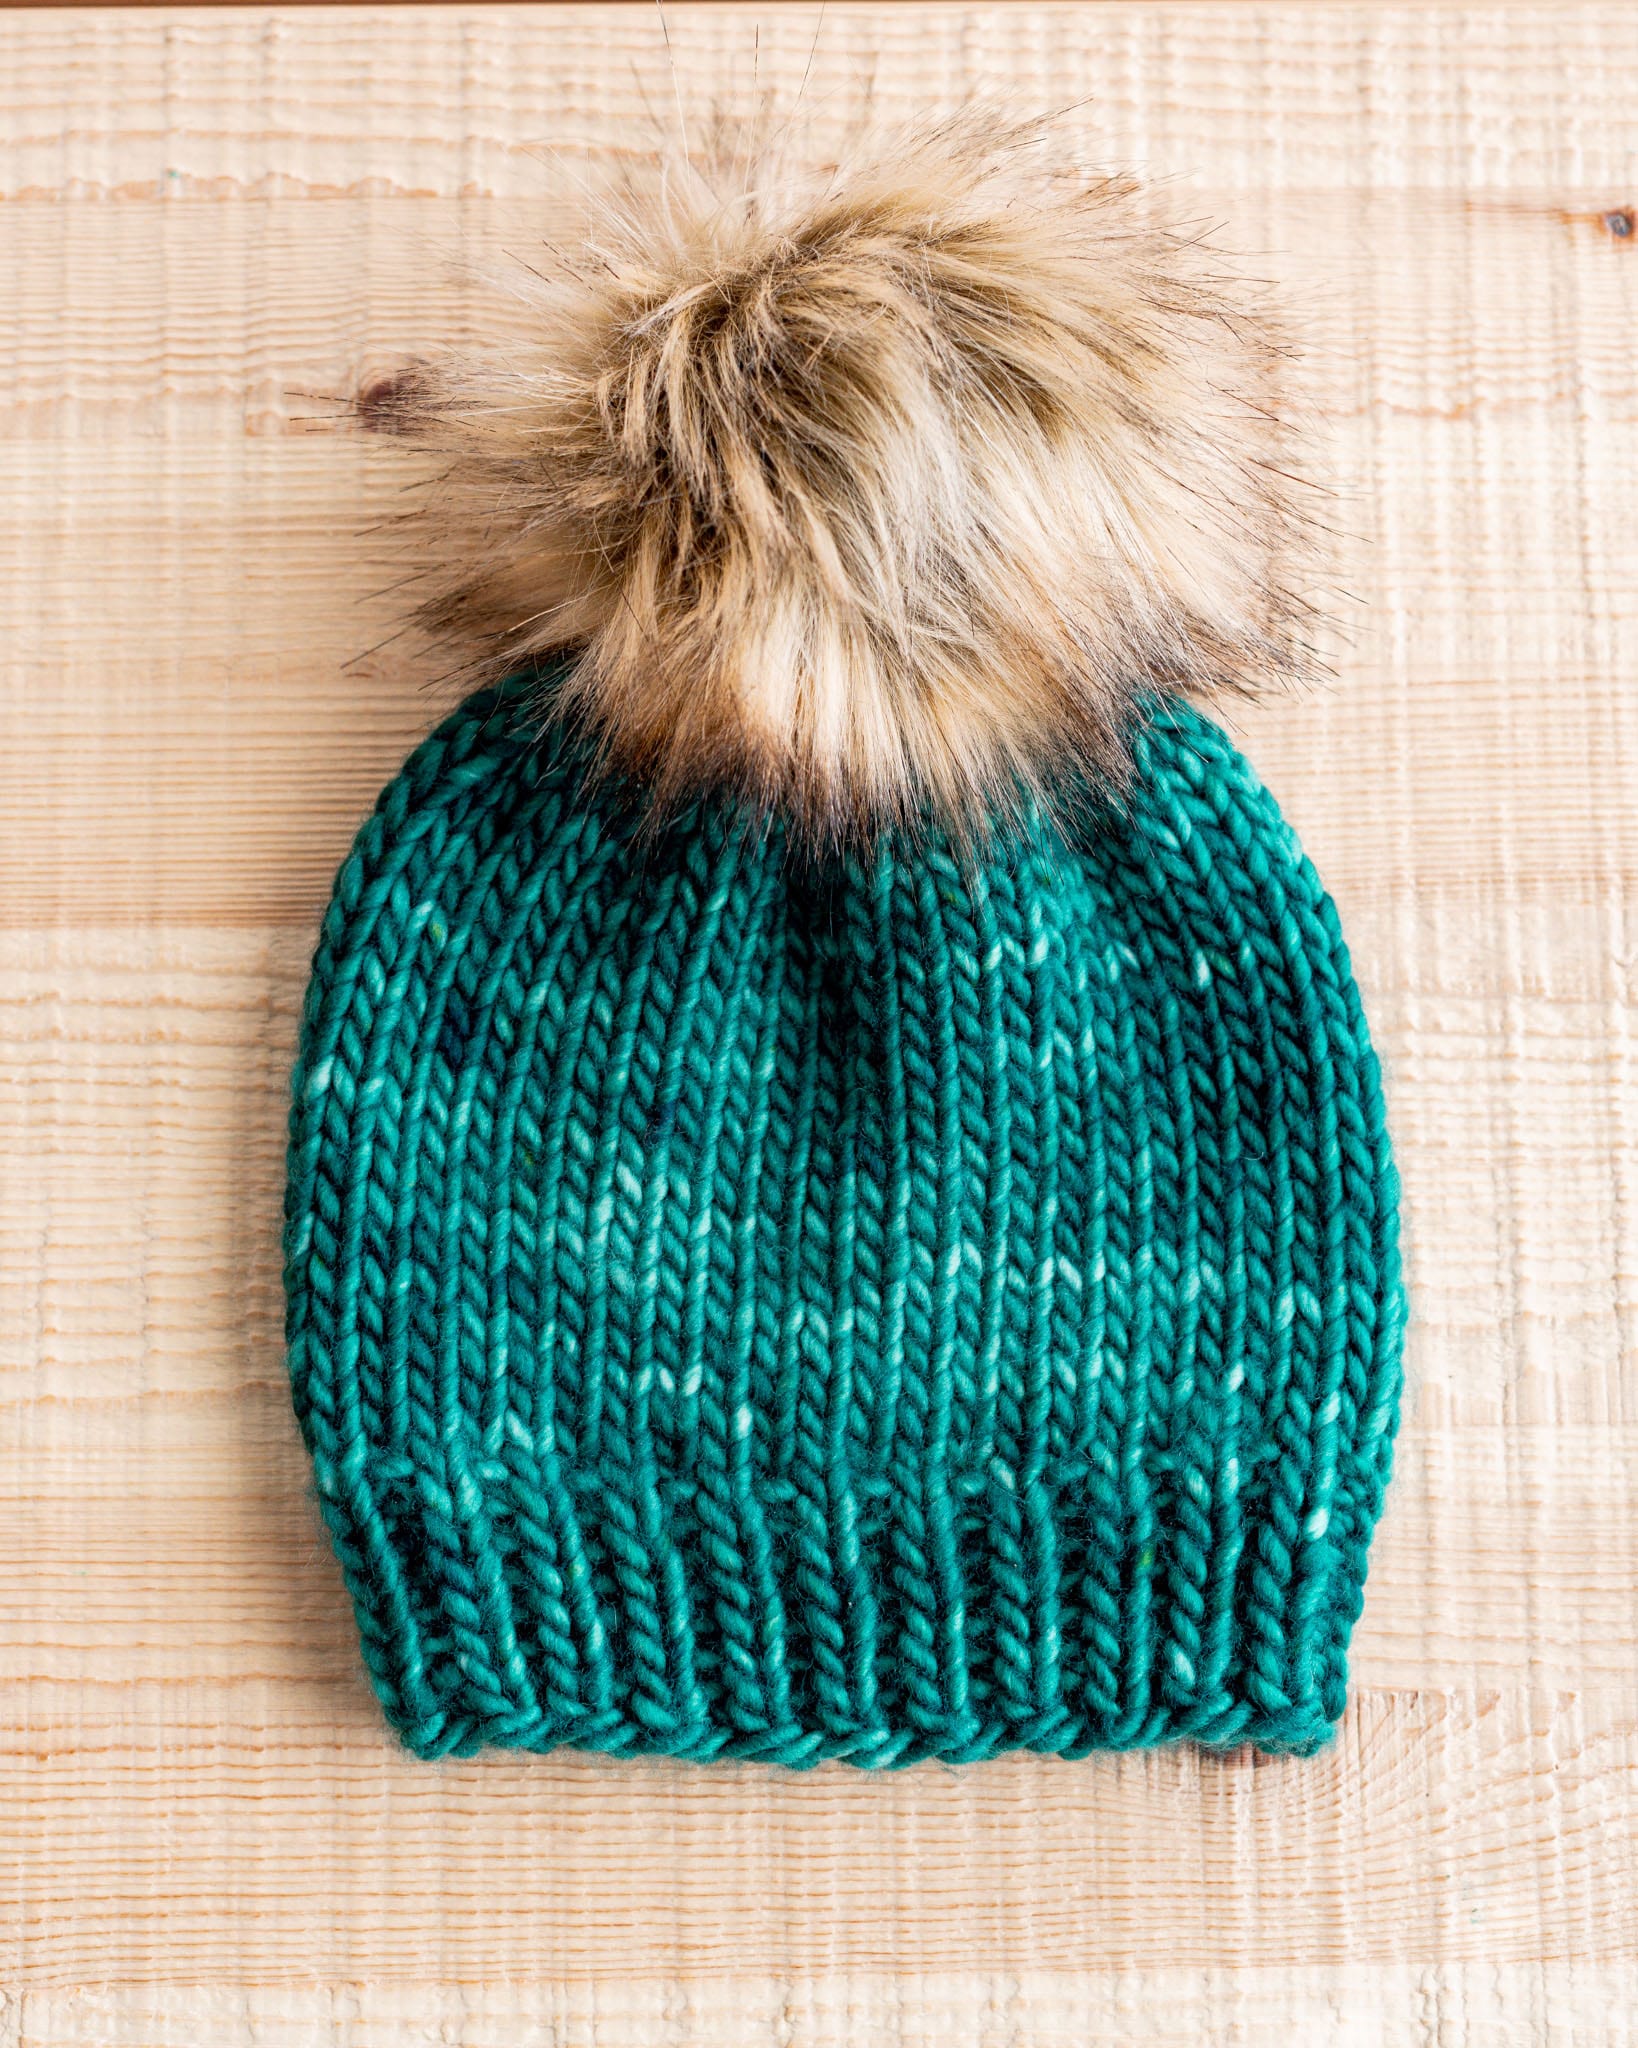 36 Projects Cute Knit Hats for Kids